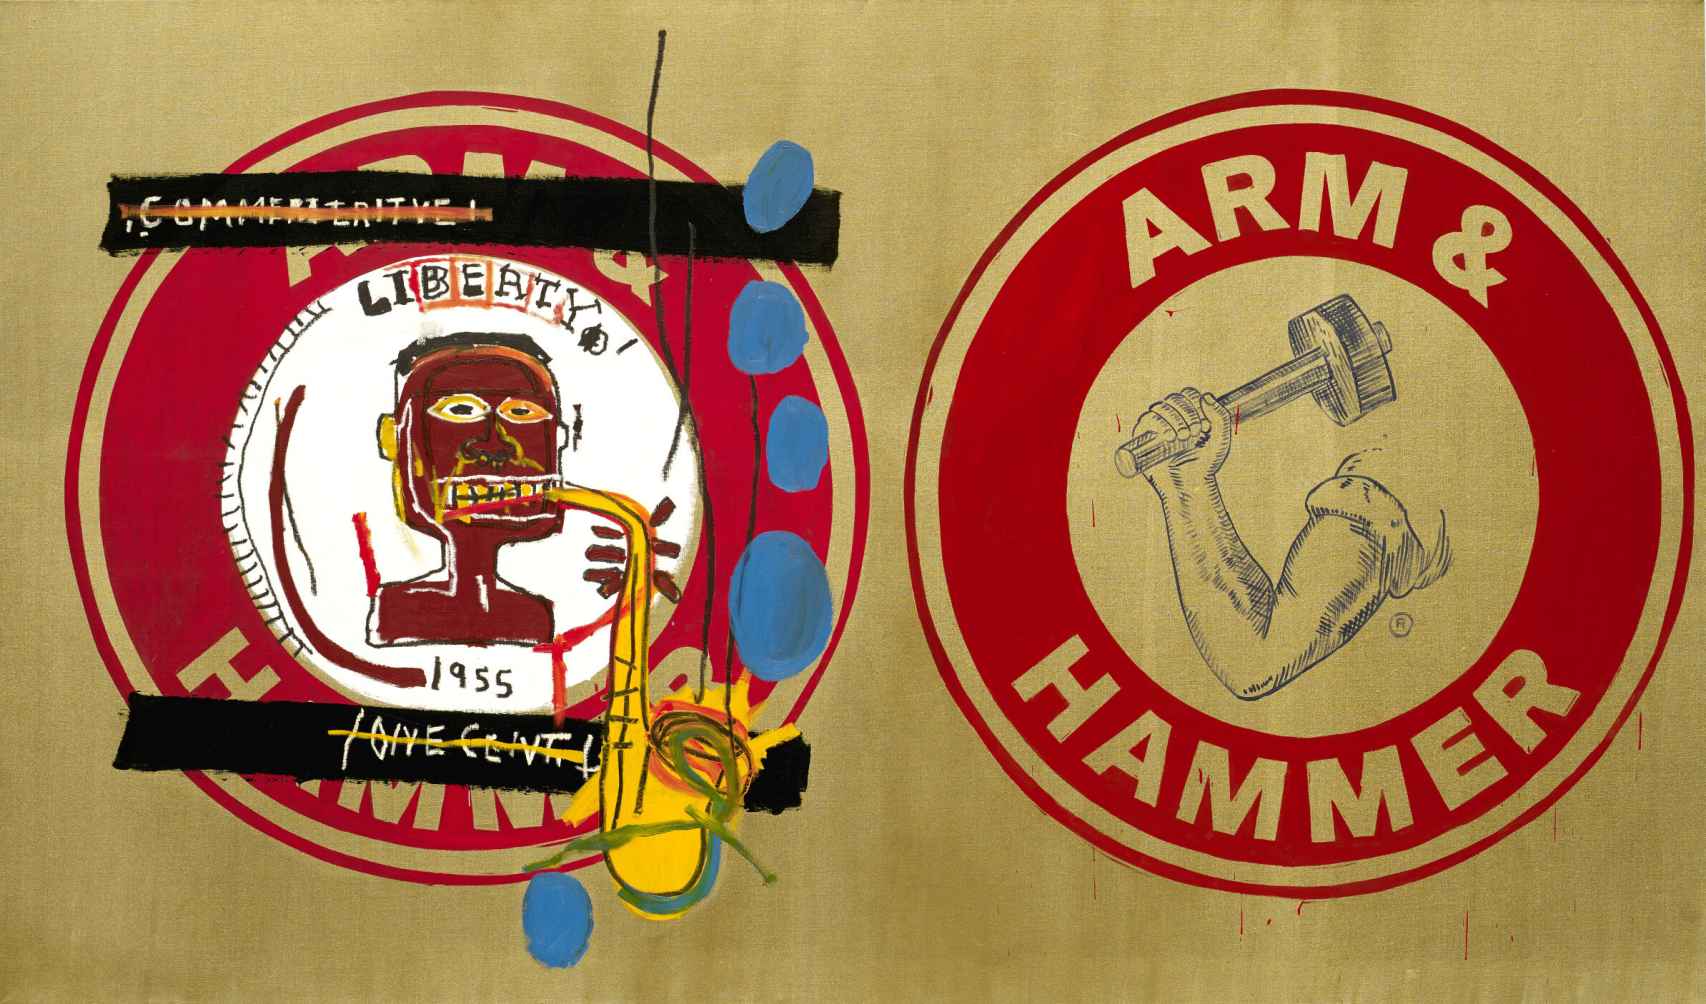 Jean-Michel Basquiat y Andy Warhol: 'Arm and Hammer II', 1984-1985. Collection Bischofberger, Männedorf-Zurich, Suisse. ©The Estate of Jean-Michel Basquiat. Licensed by Artestar, New York. ©The Andy Warhol Foundation for the Visual Arts, Inc. / Licensed by ADAGP, Paris 2023